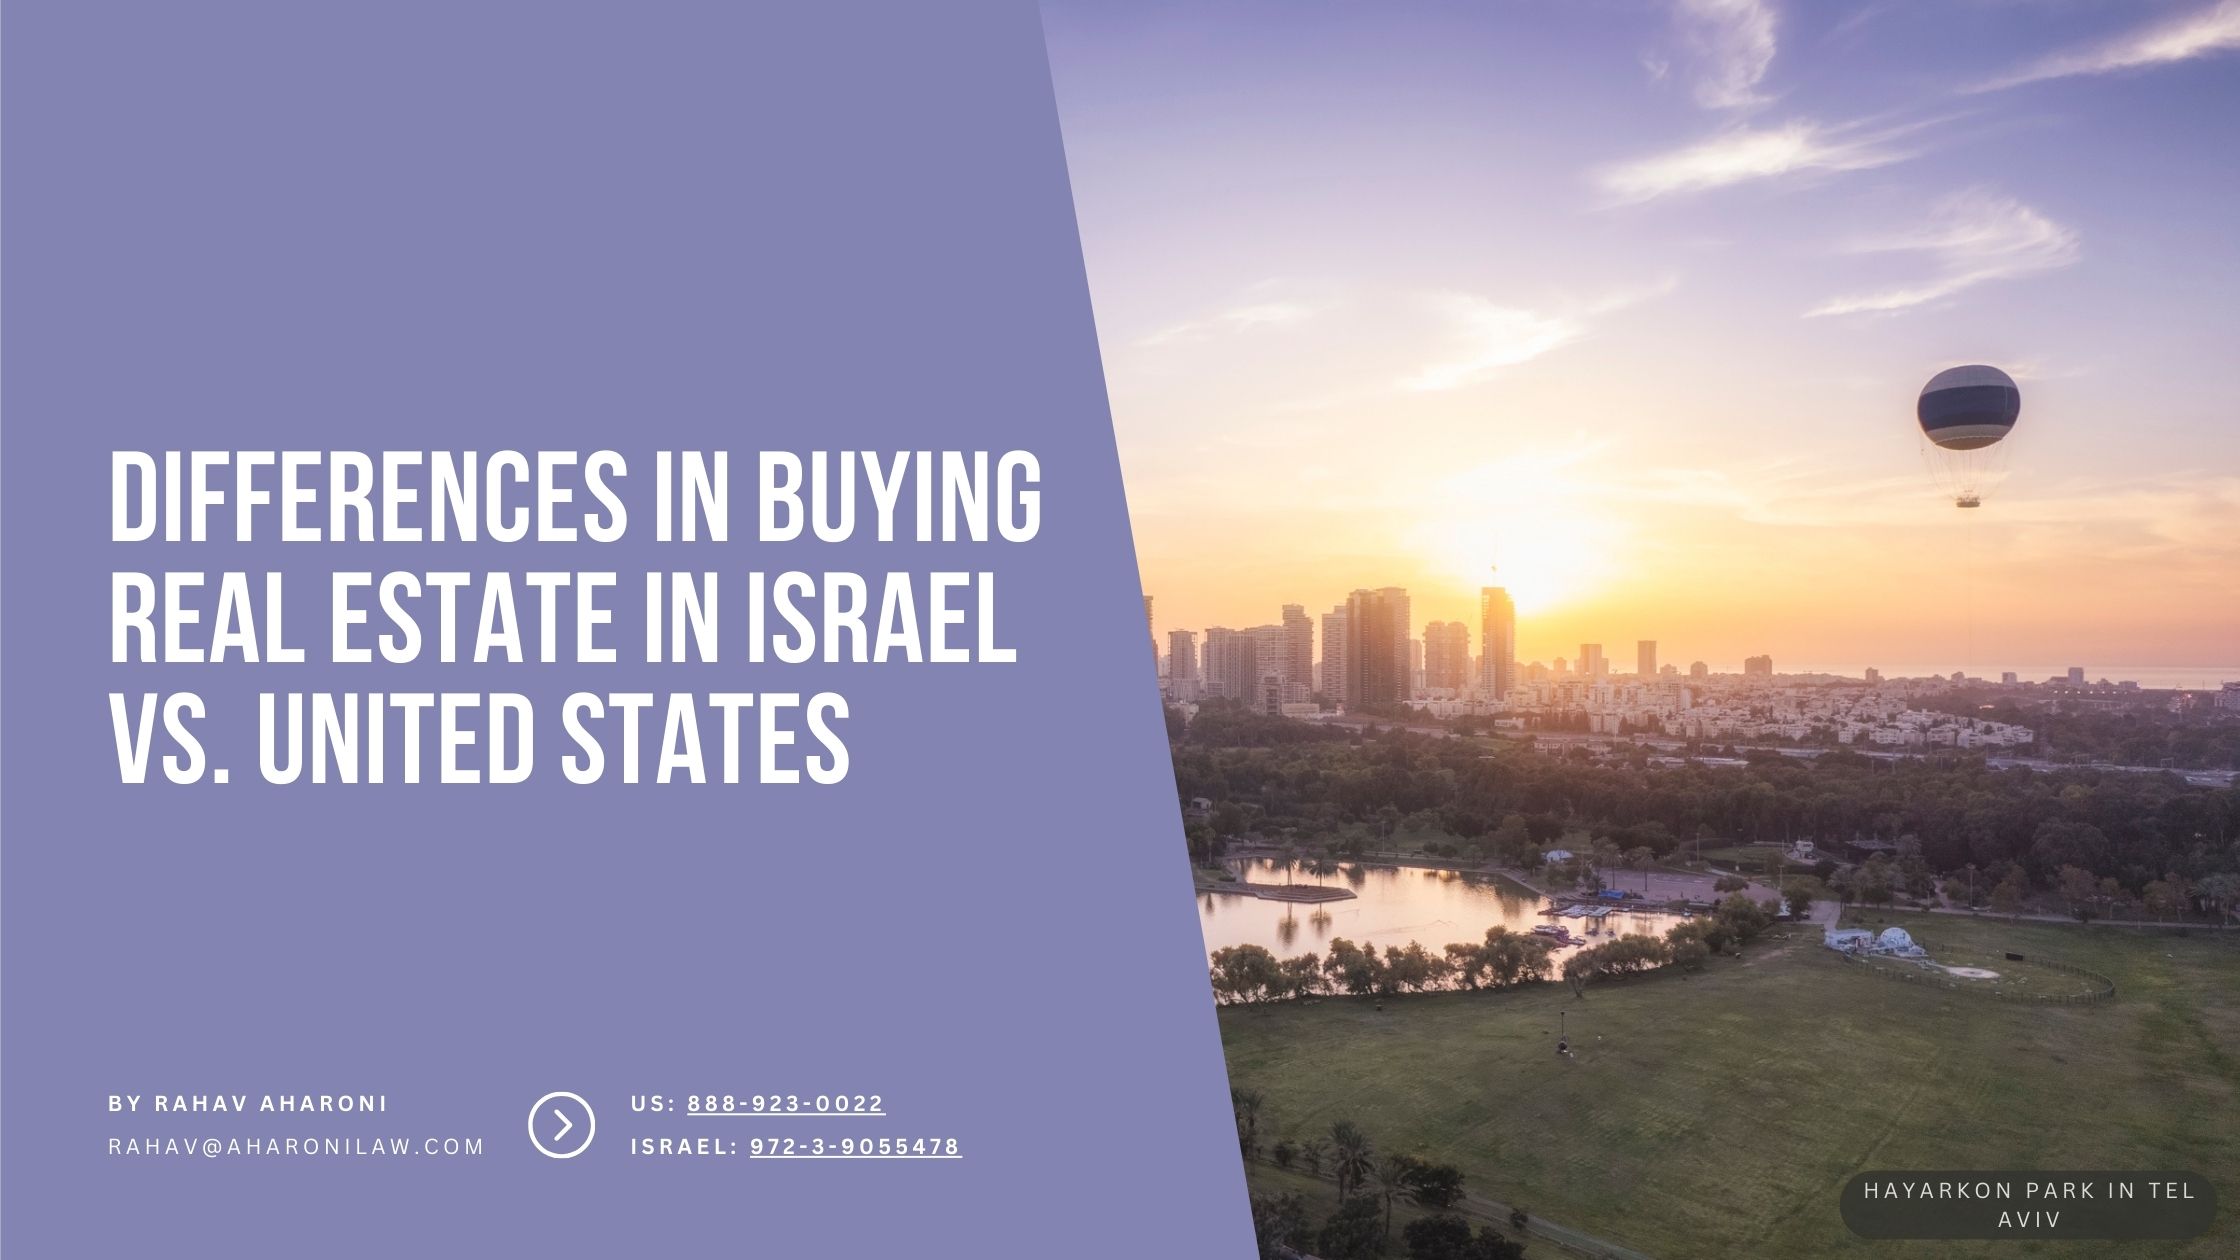 The Differences Between Buying Real Estate in Israel vs in the United States